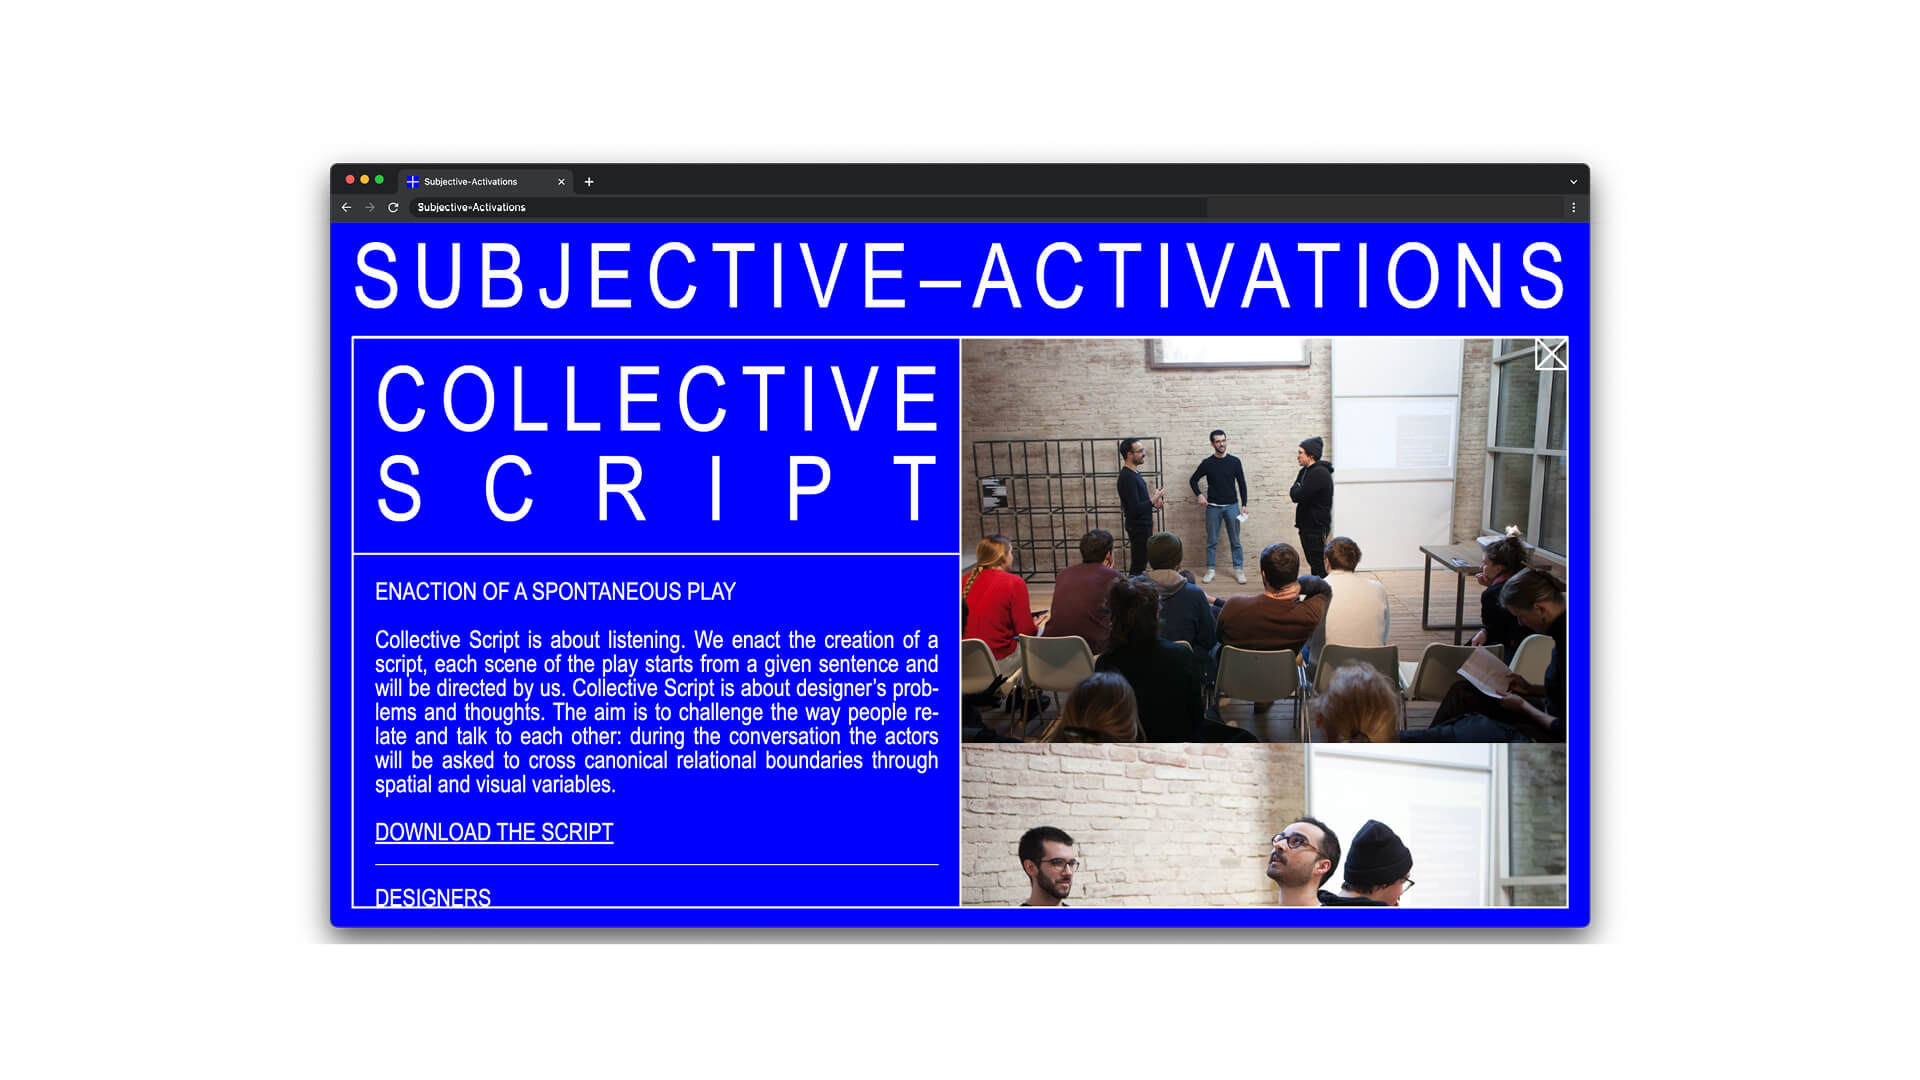 Subjective Activation website page created for the Collective Script workshop